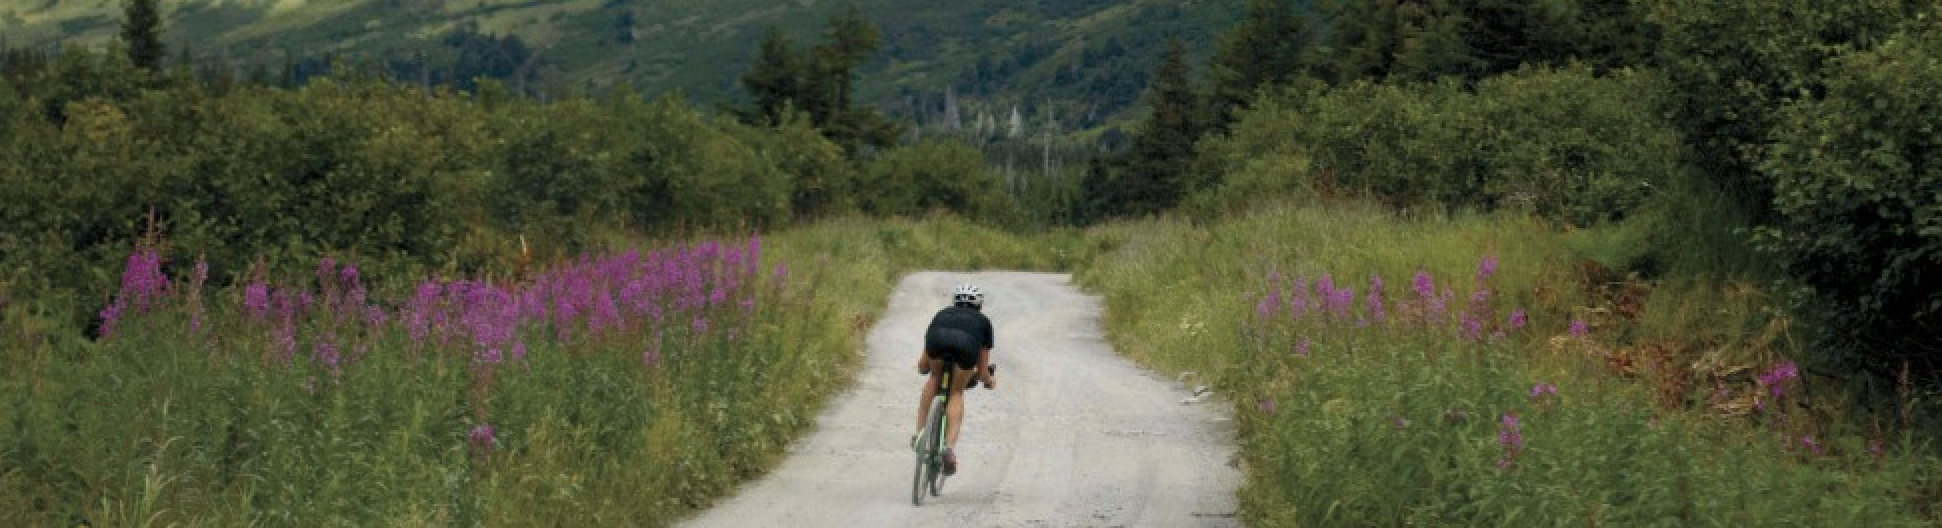 Person riding a bike on beautiful mountain path surrounded by wildflowers